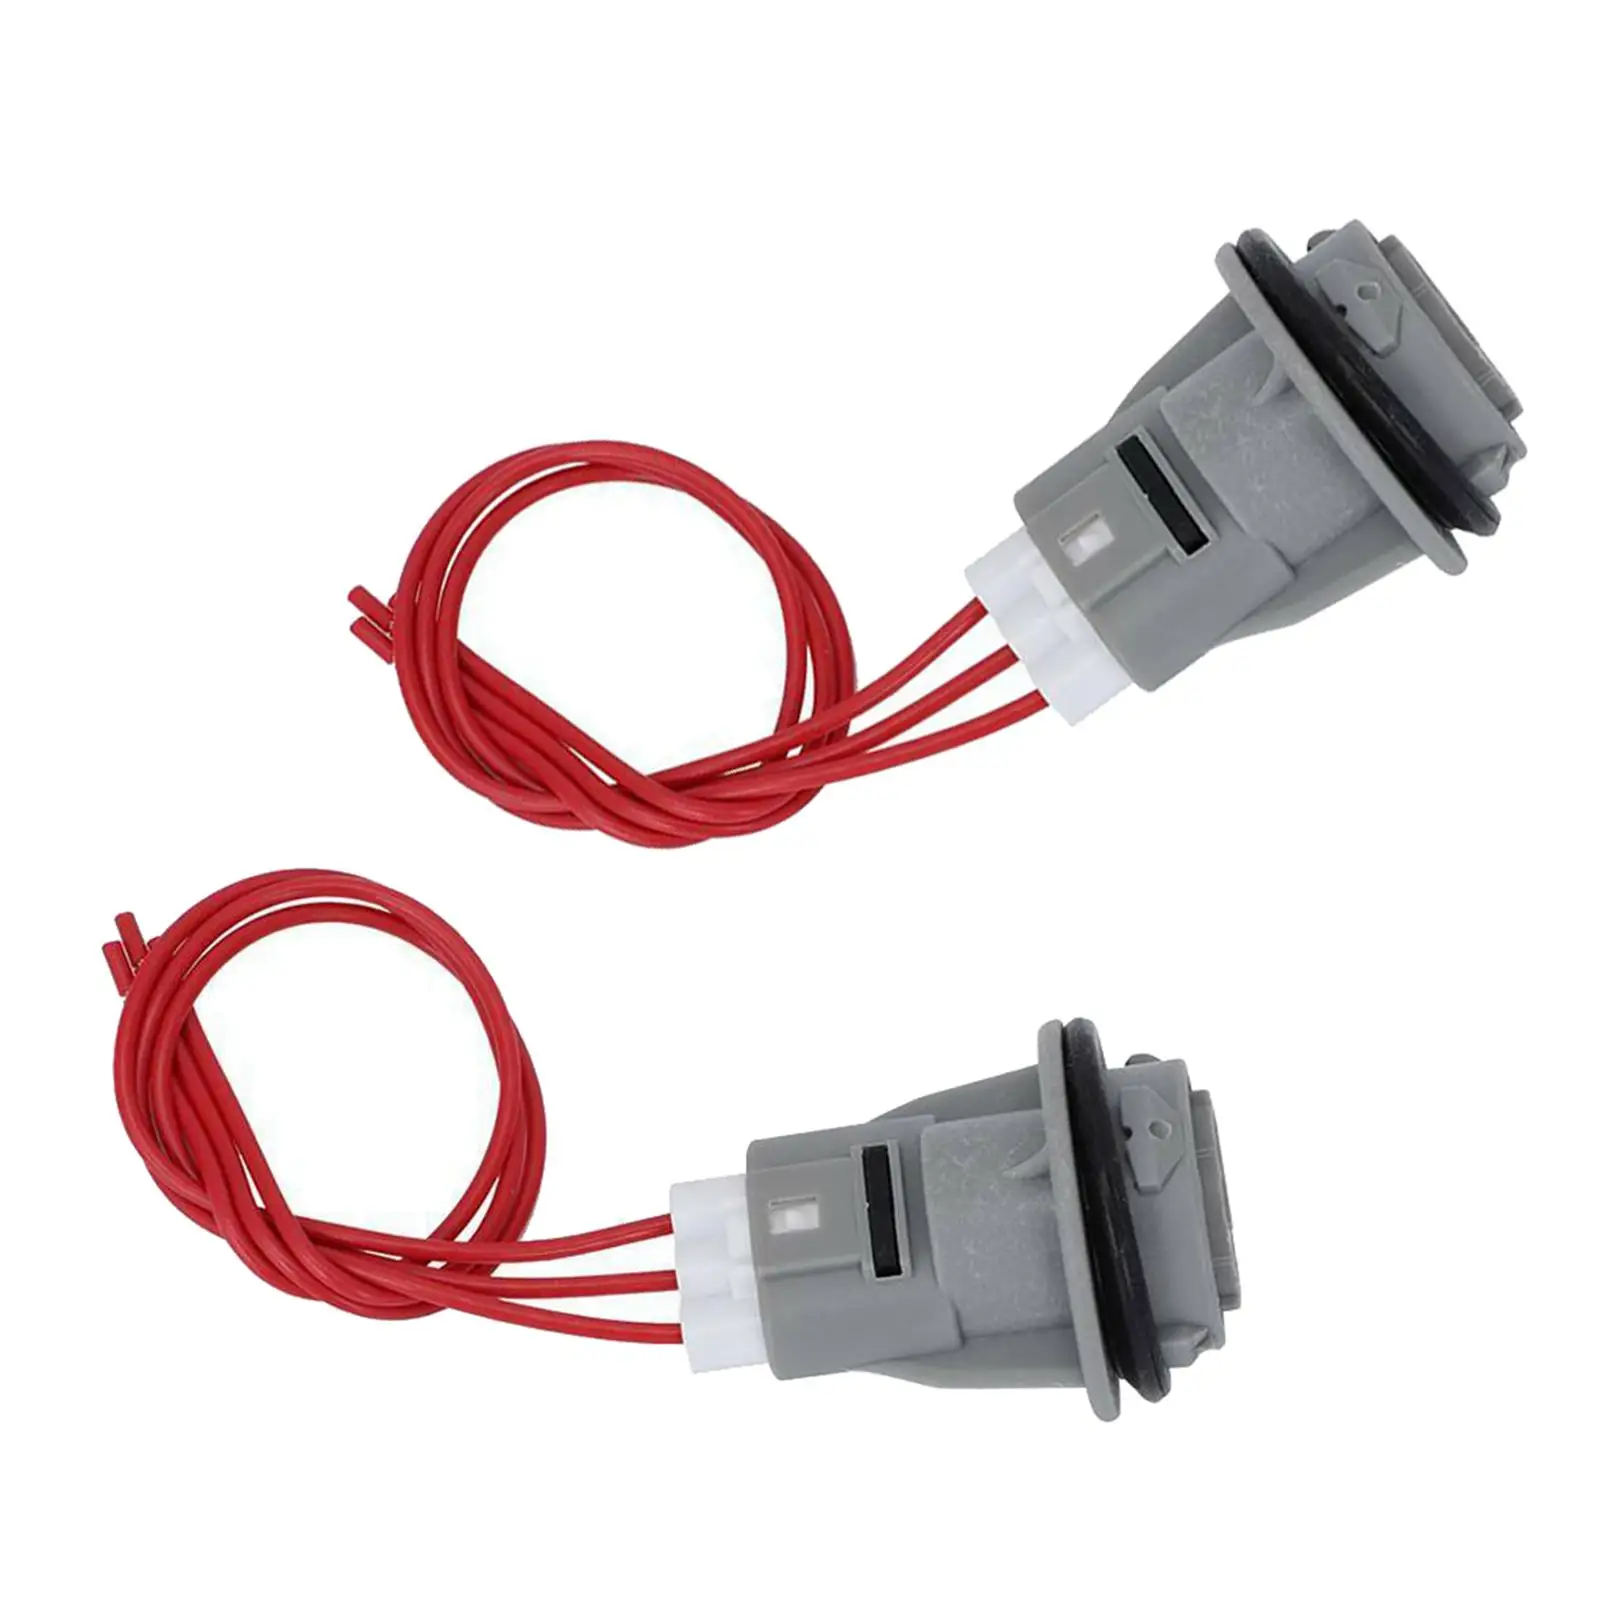 1 Pair Front  Blinker   Connector Harness 3302-Sr3-A0 for   Accord